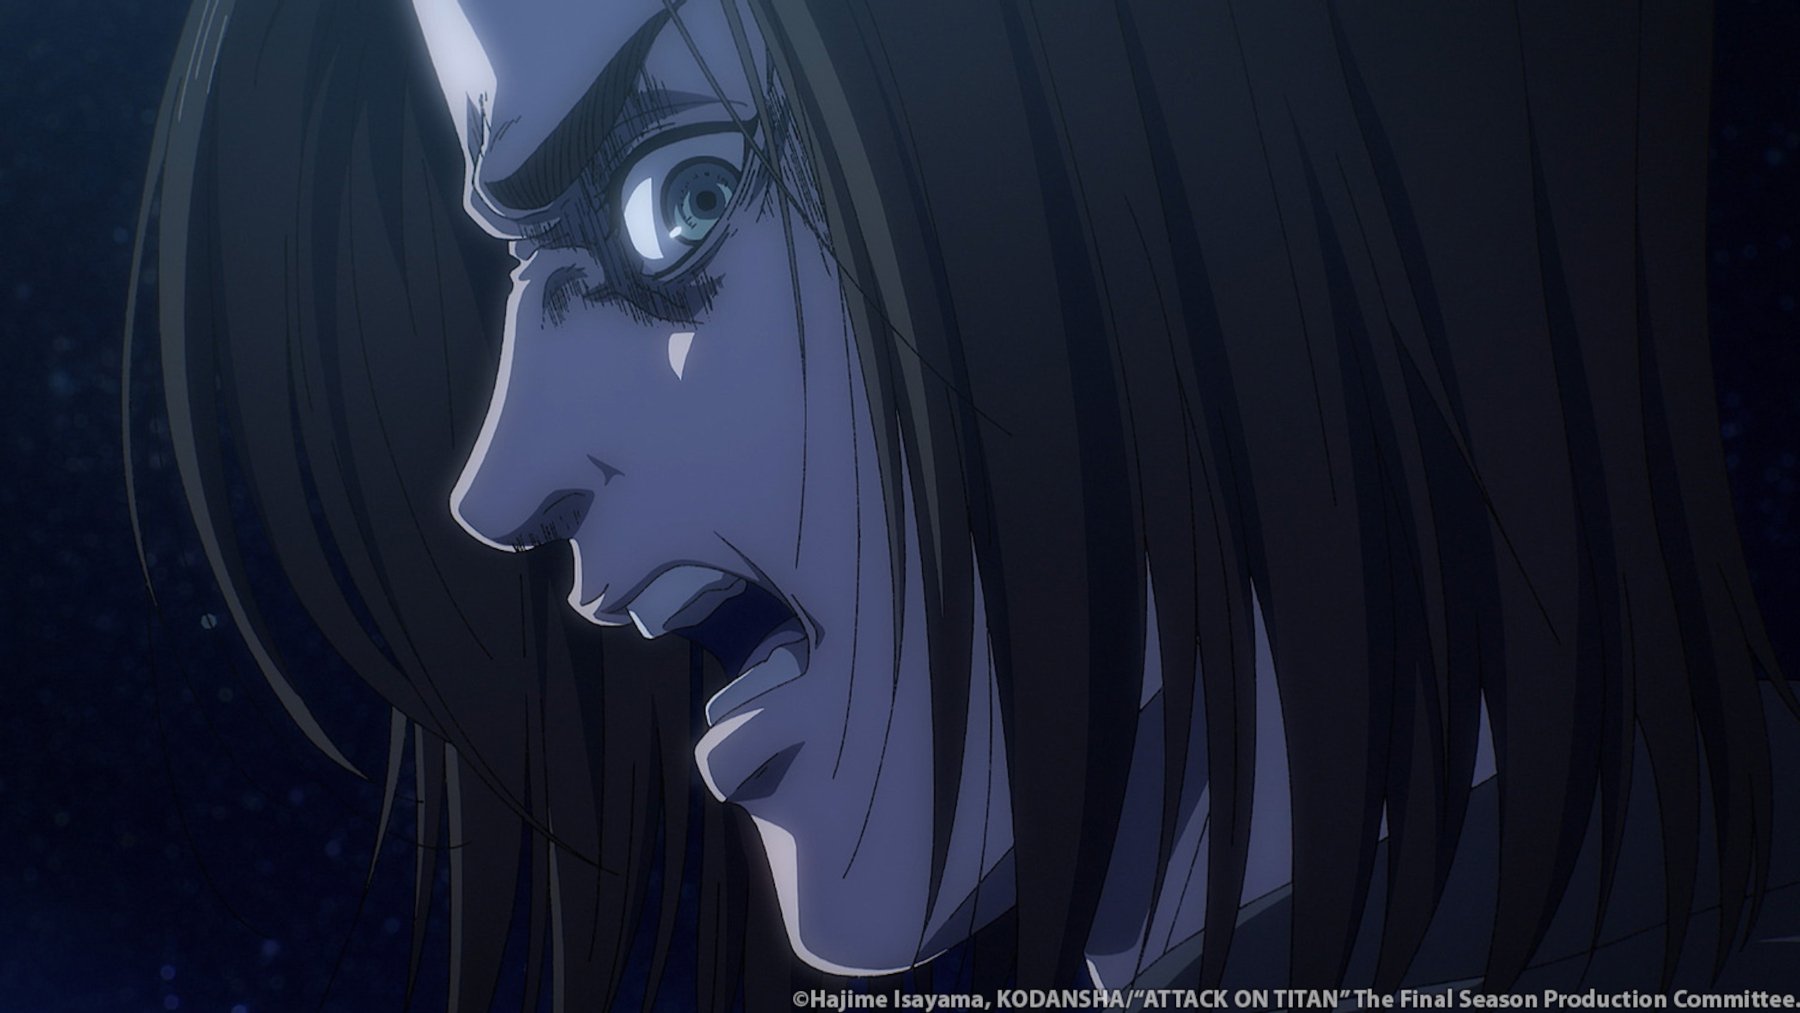 Eren Yeager in 'Attack on Titan,' which was just renewed for season 4 part 3. The image shows a side profile of his face, and he looks angry and is speaking.